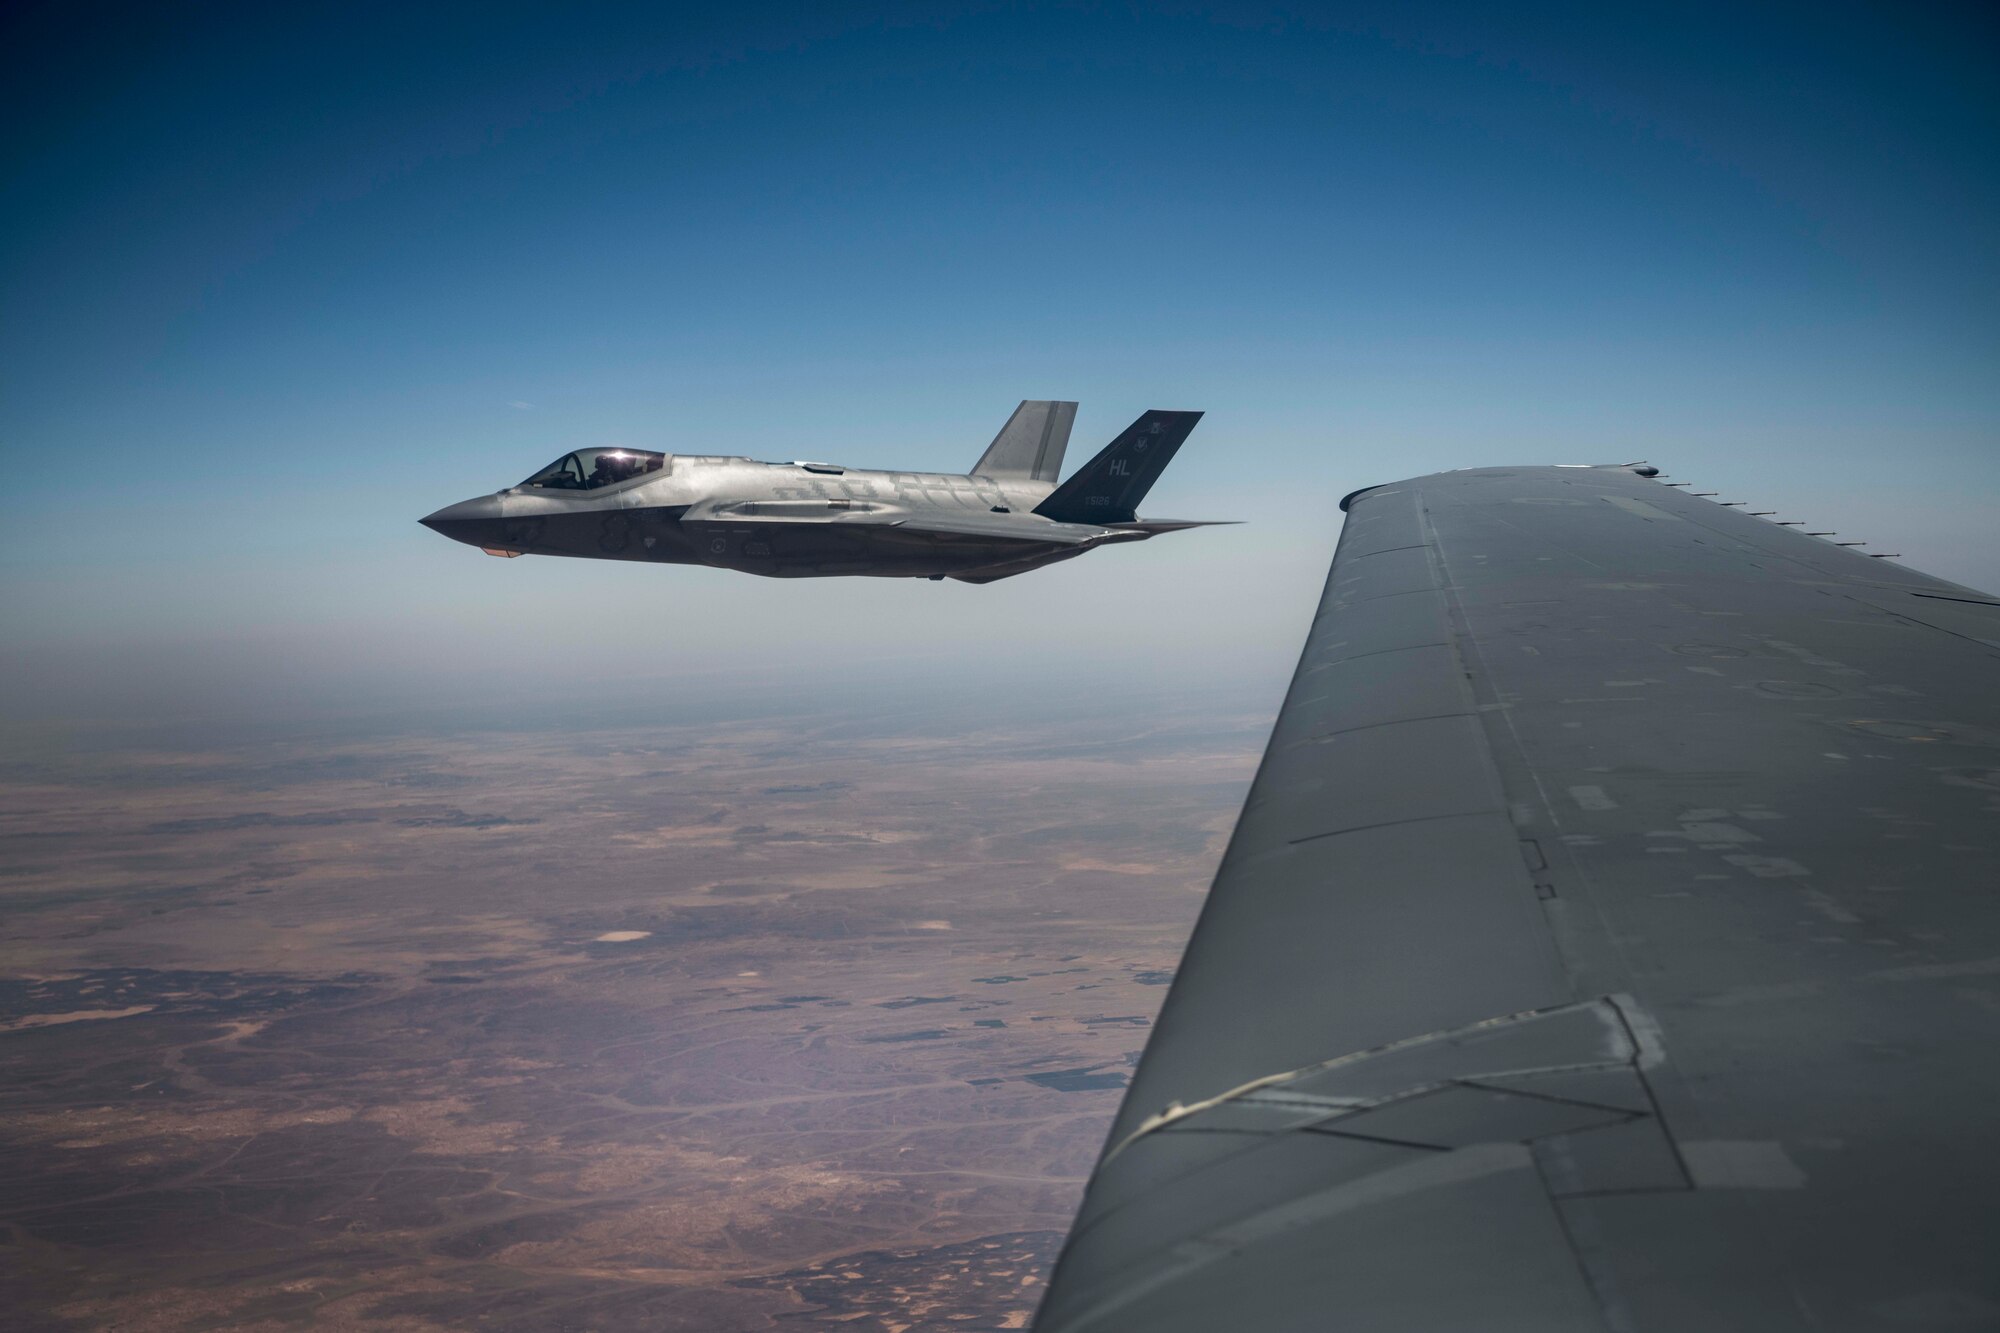 A U.S. Air Force 421st Fighter Squadron F-35A Lightning II flies next to a 908th Expeditionary Refueling Squadron KC-10 Extender after refueling during “Enduring Lightning II” exercise over Israel Aug. 2, 2020. The exercise included both U.S. and Israeli forces whom trained to maintain readiness and to defend the region together. (U.S. Air Force photo by Master Sgt. Patrick OReilly)